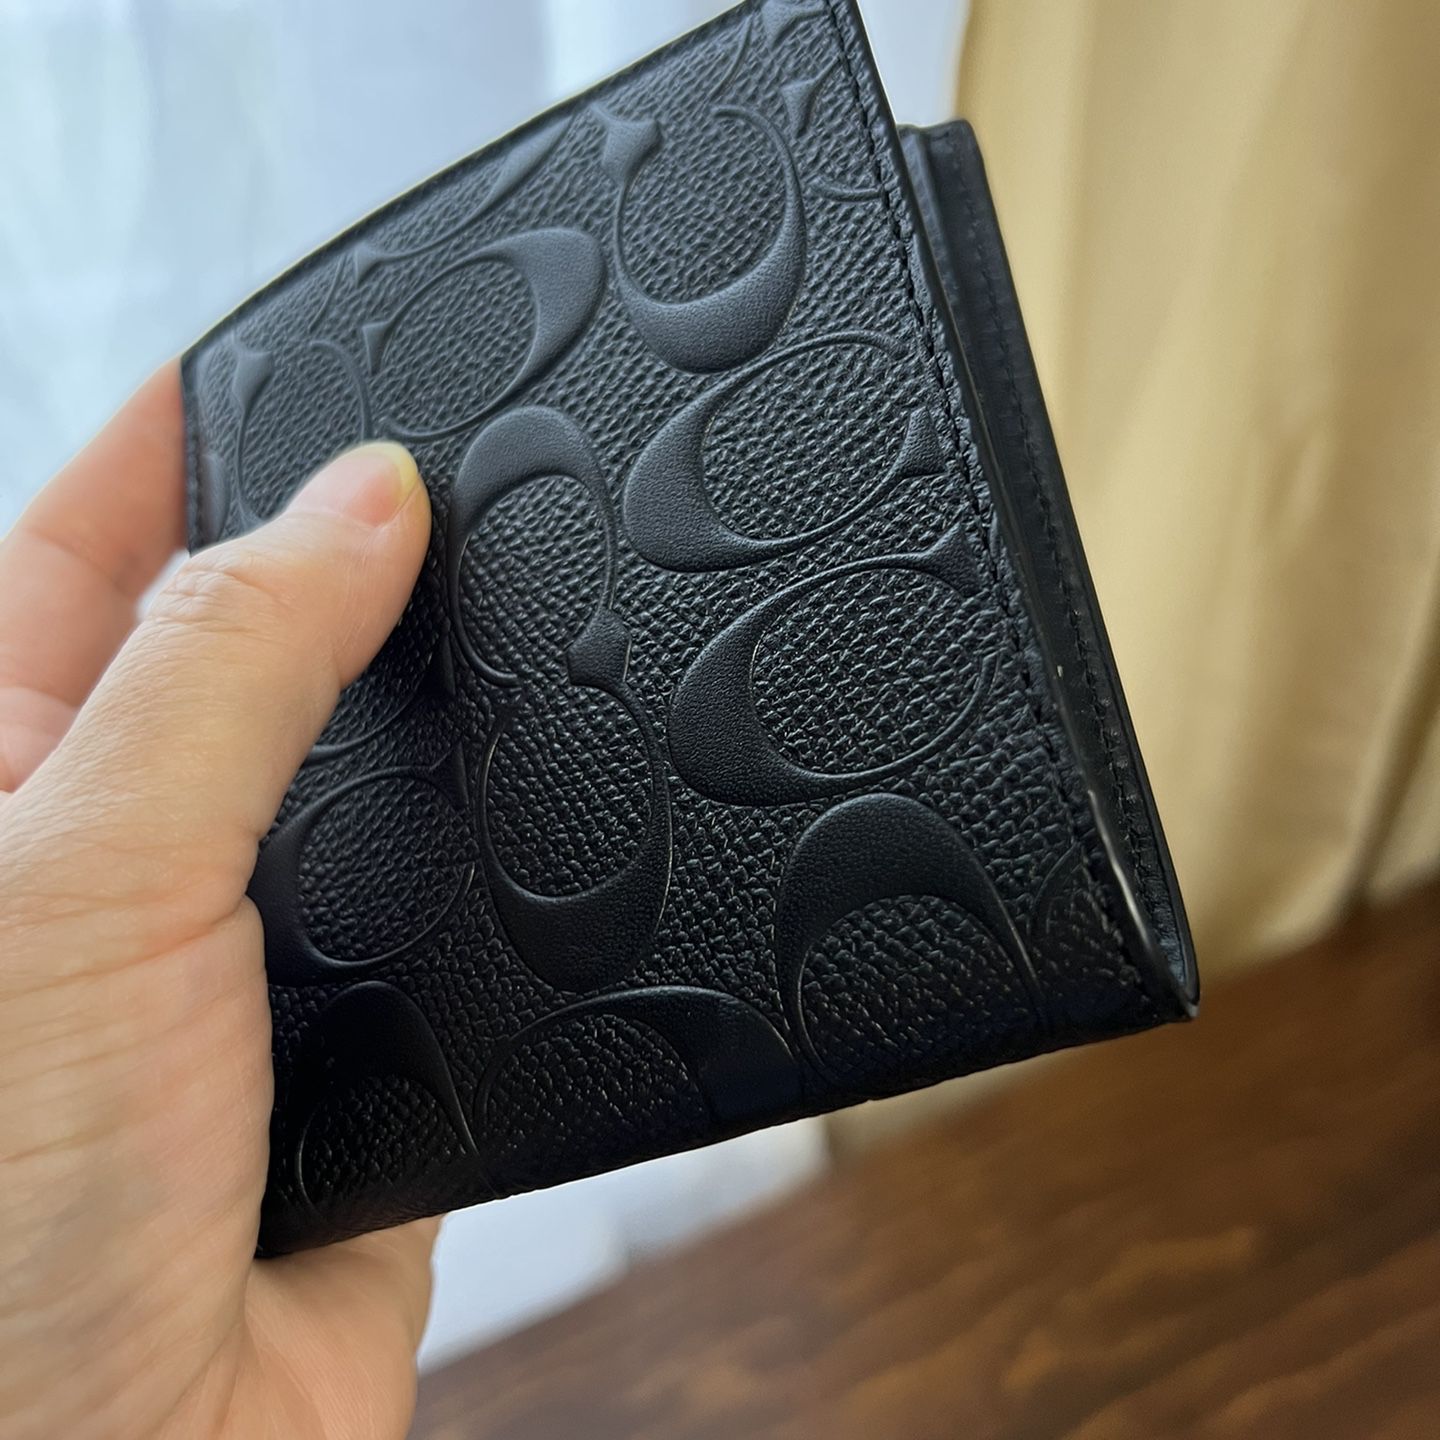 Coach Men's Embossed logo leather Wallet for Sale in Queens, NY